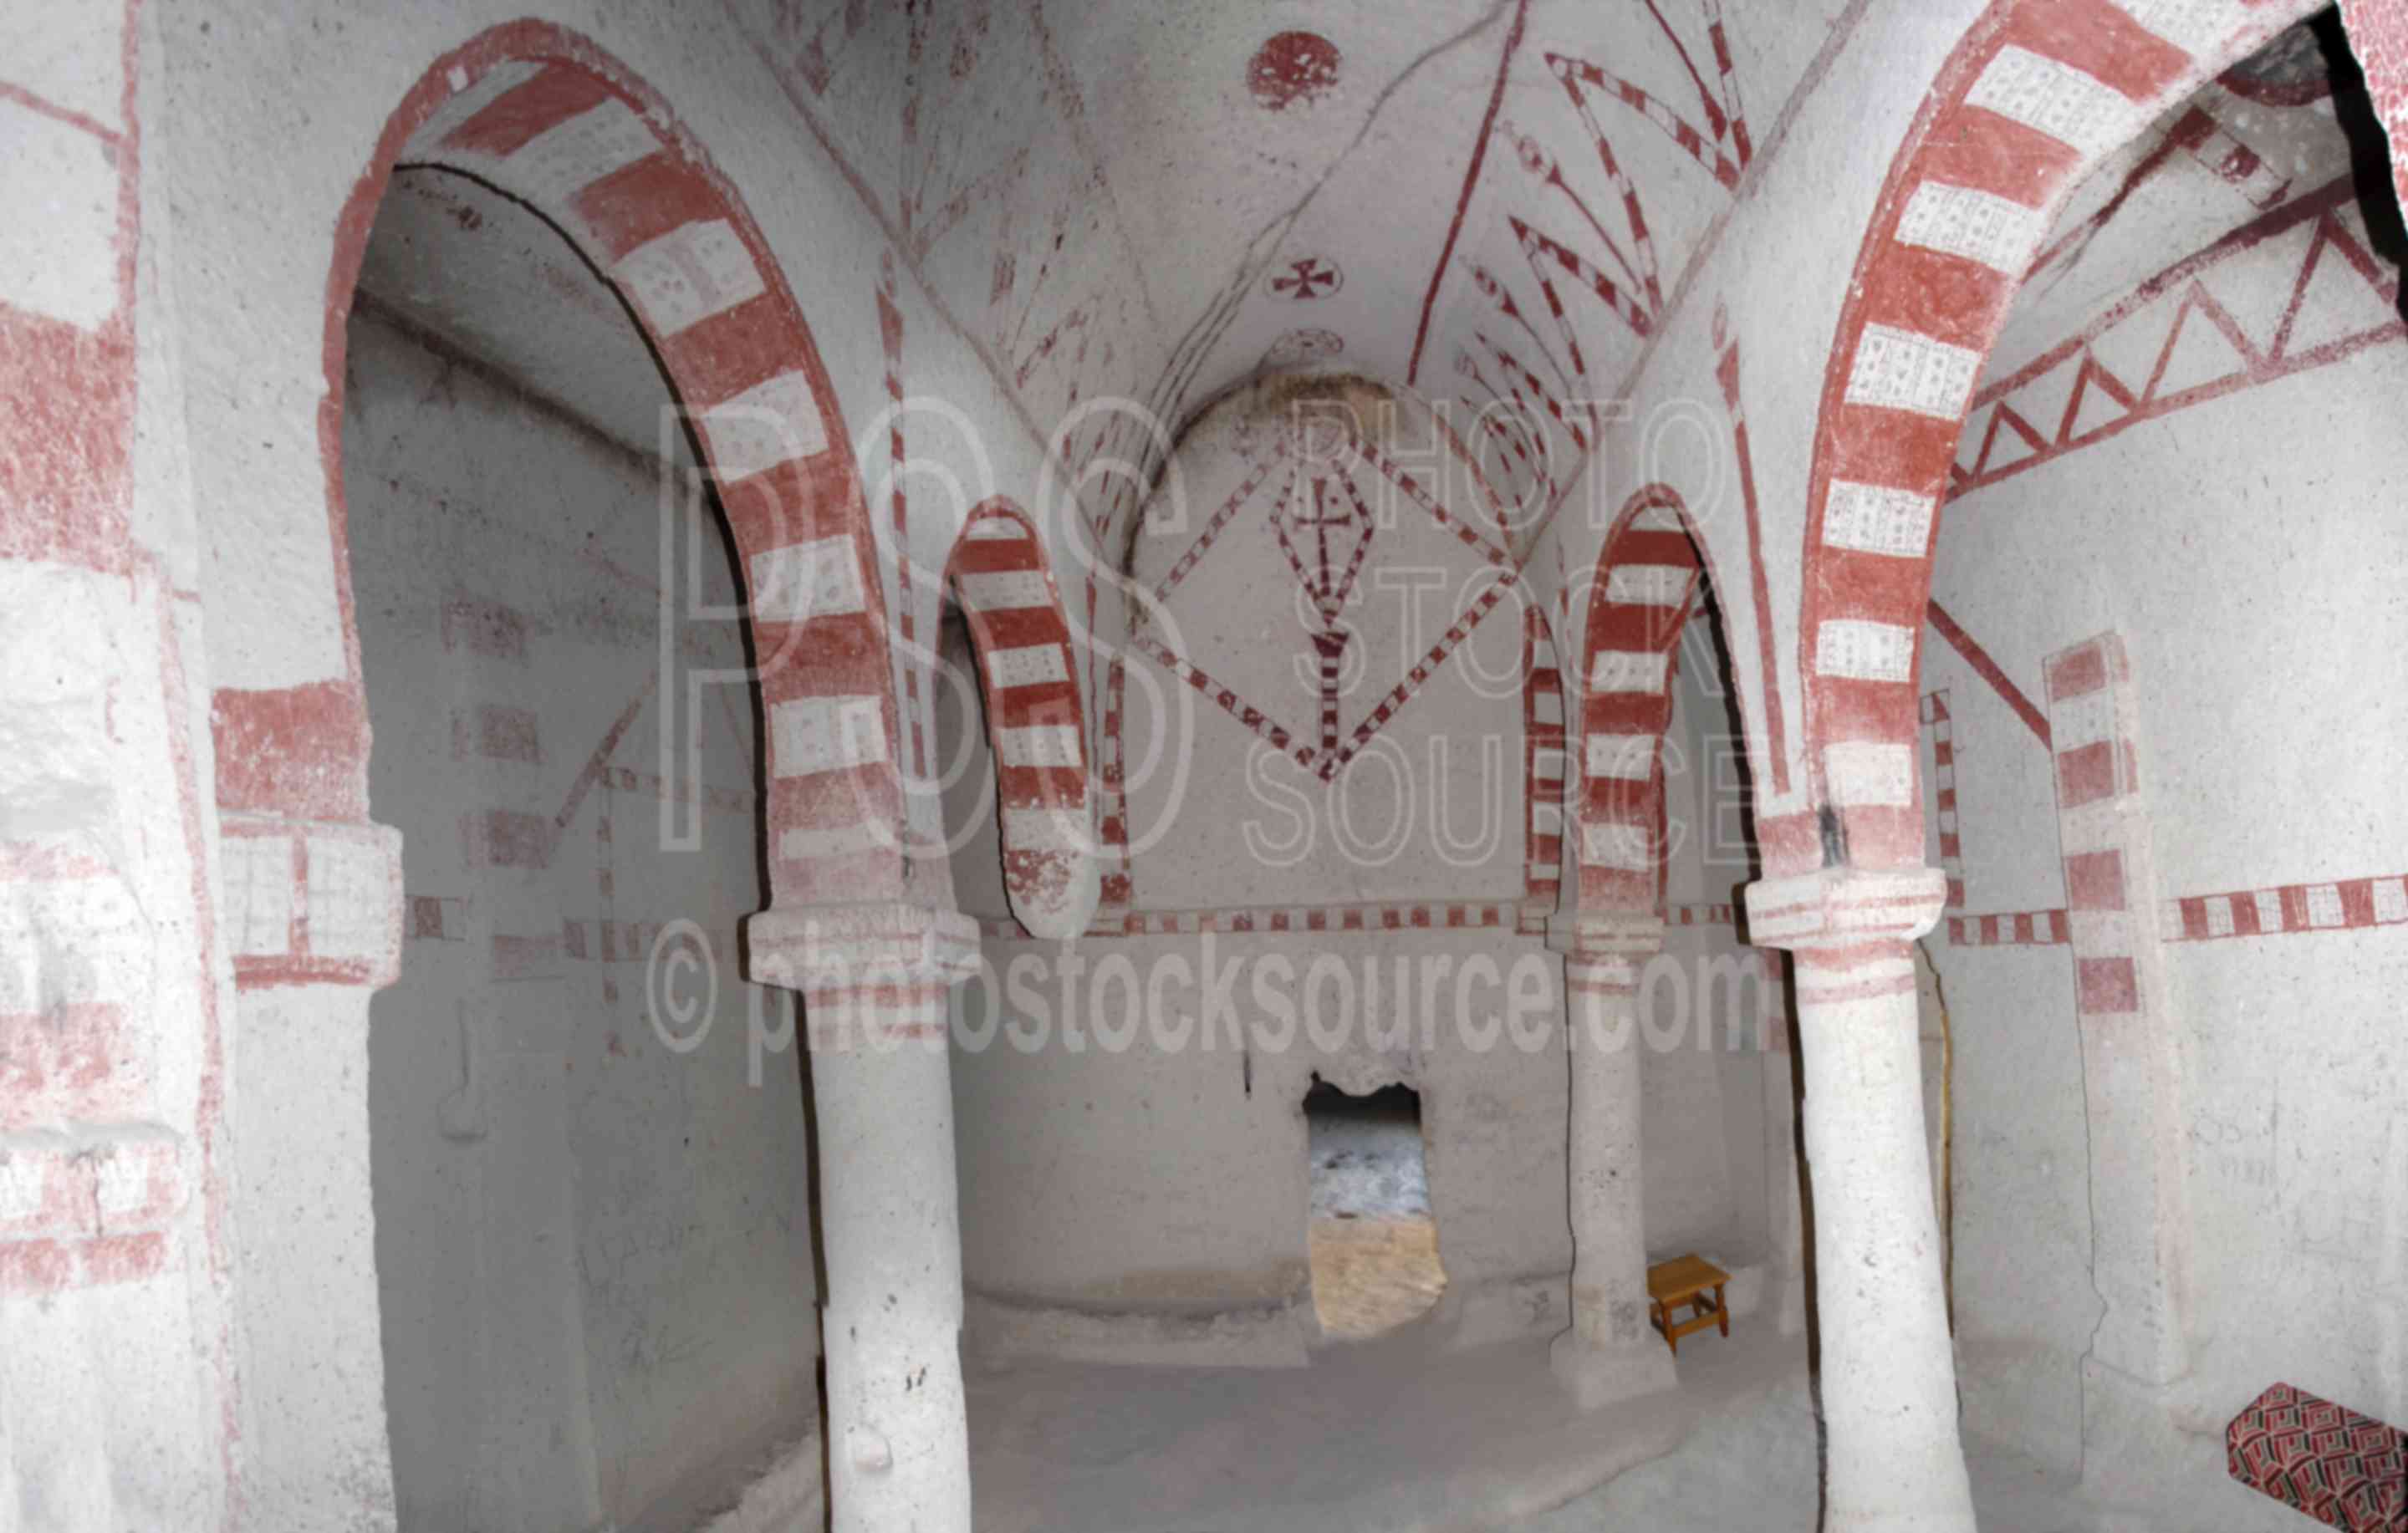 Aynali Carved Church,carved,arch,ceiling,decoration,architecture,churches,religion